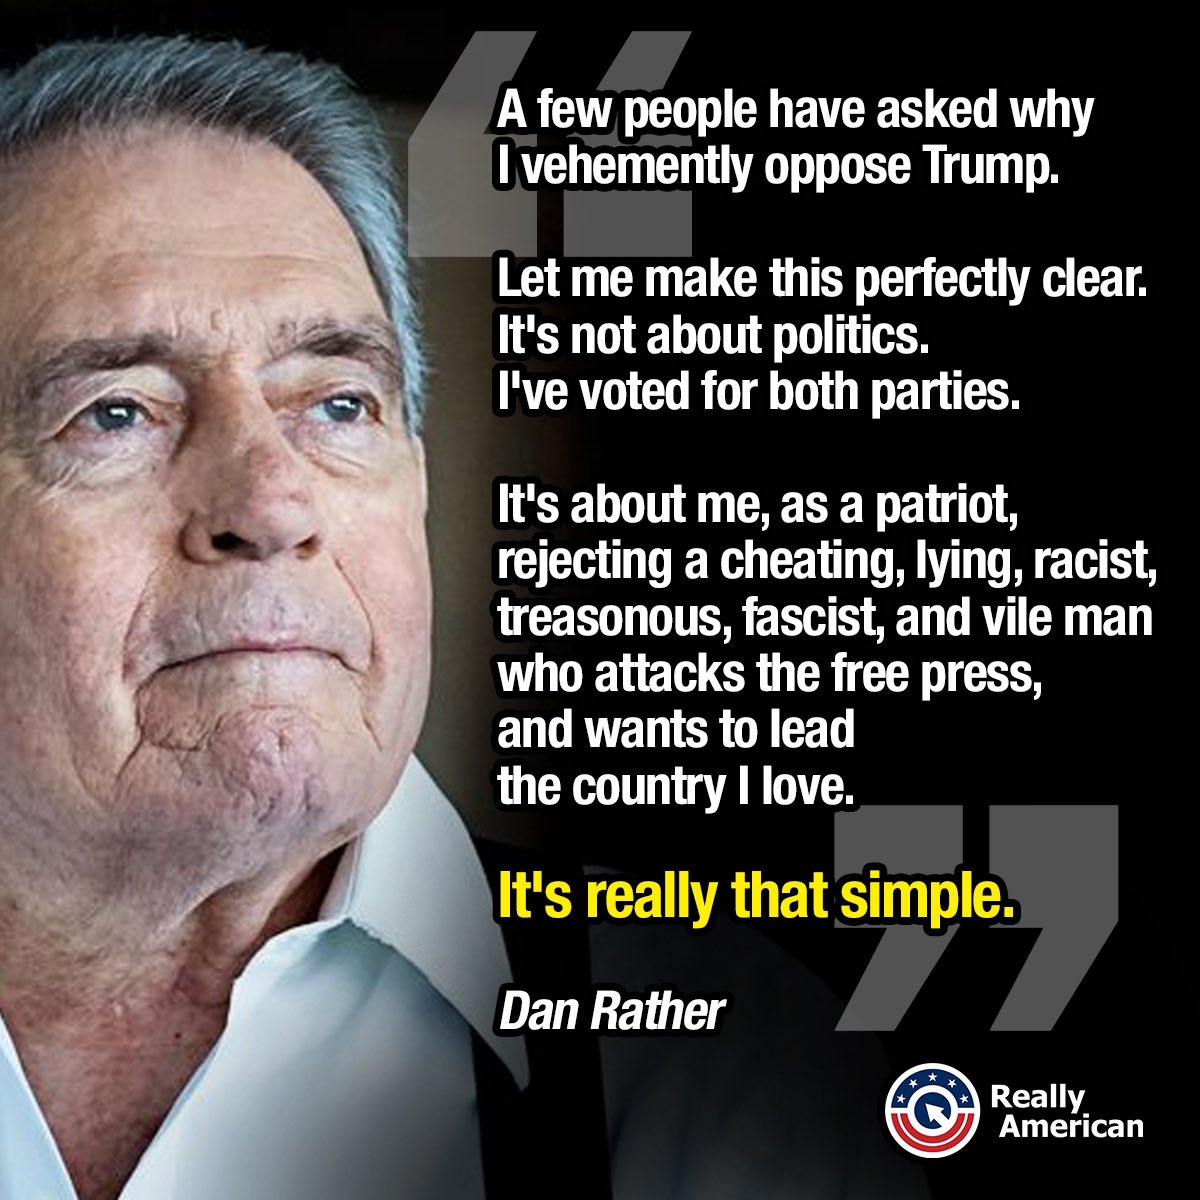 I'm with @DanRather and also the voice of reason!